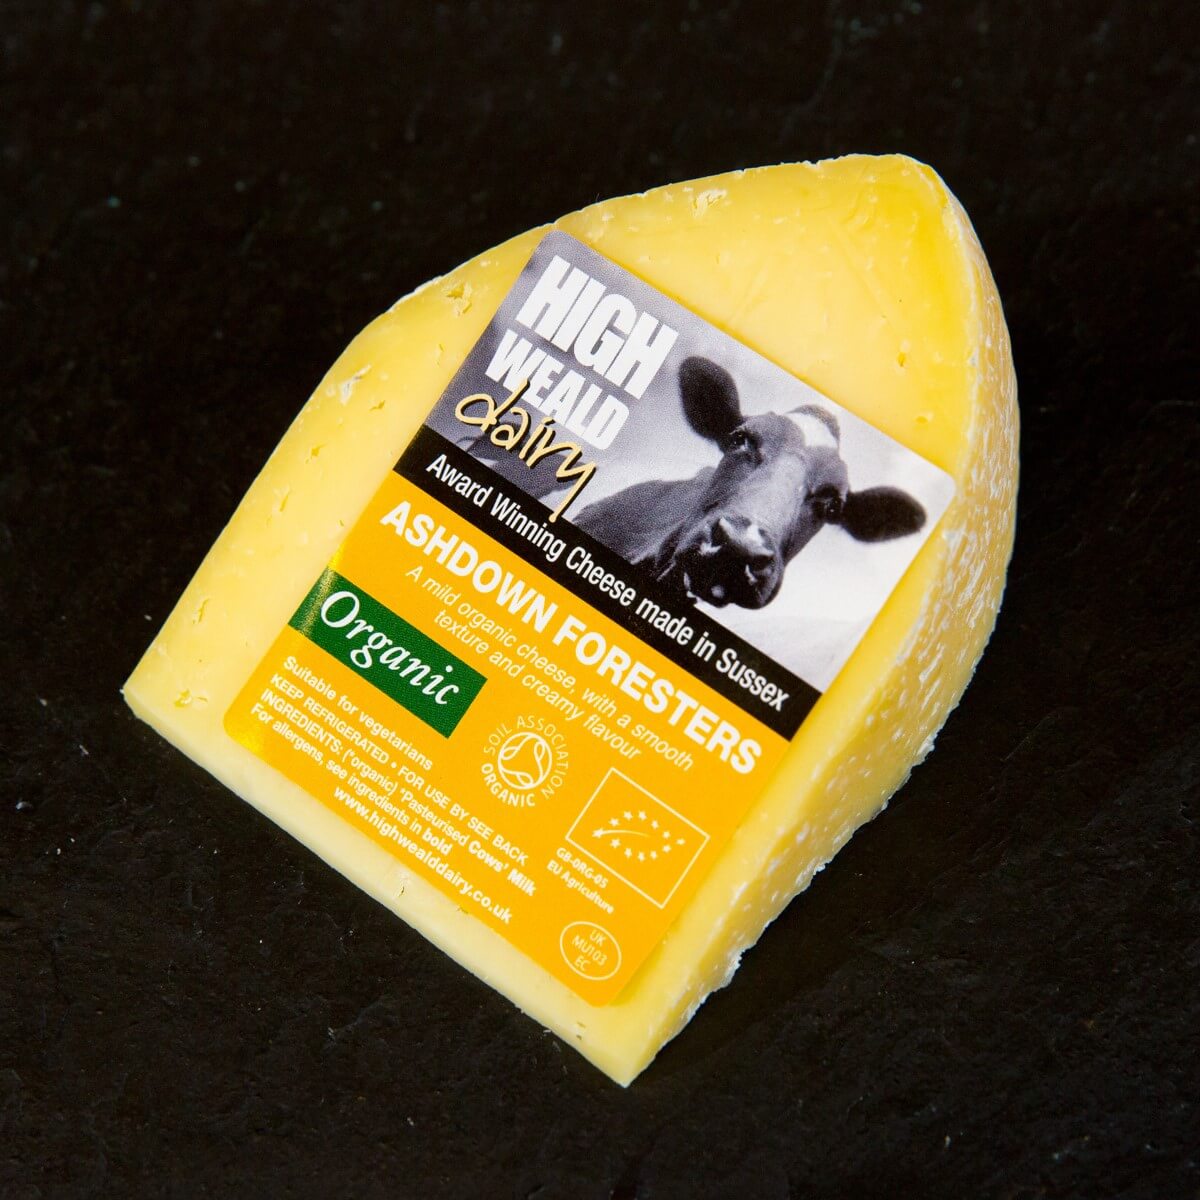 A glimpse of diverse products by High Weald Dairy, supporting the UK economy on YouK.